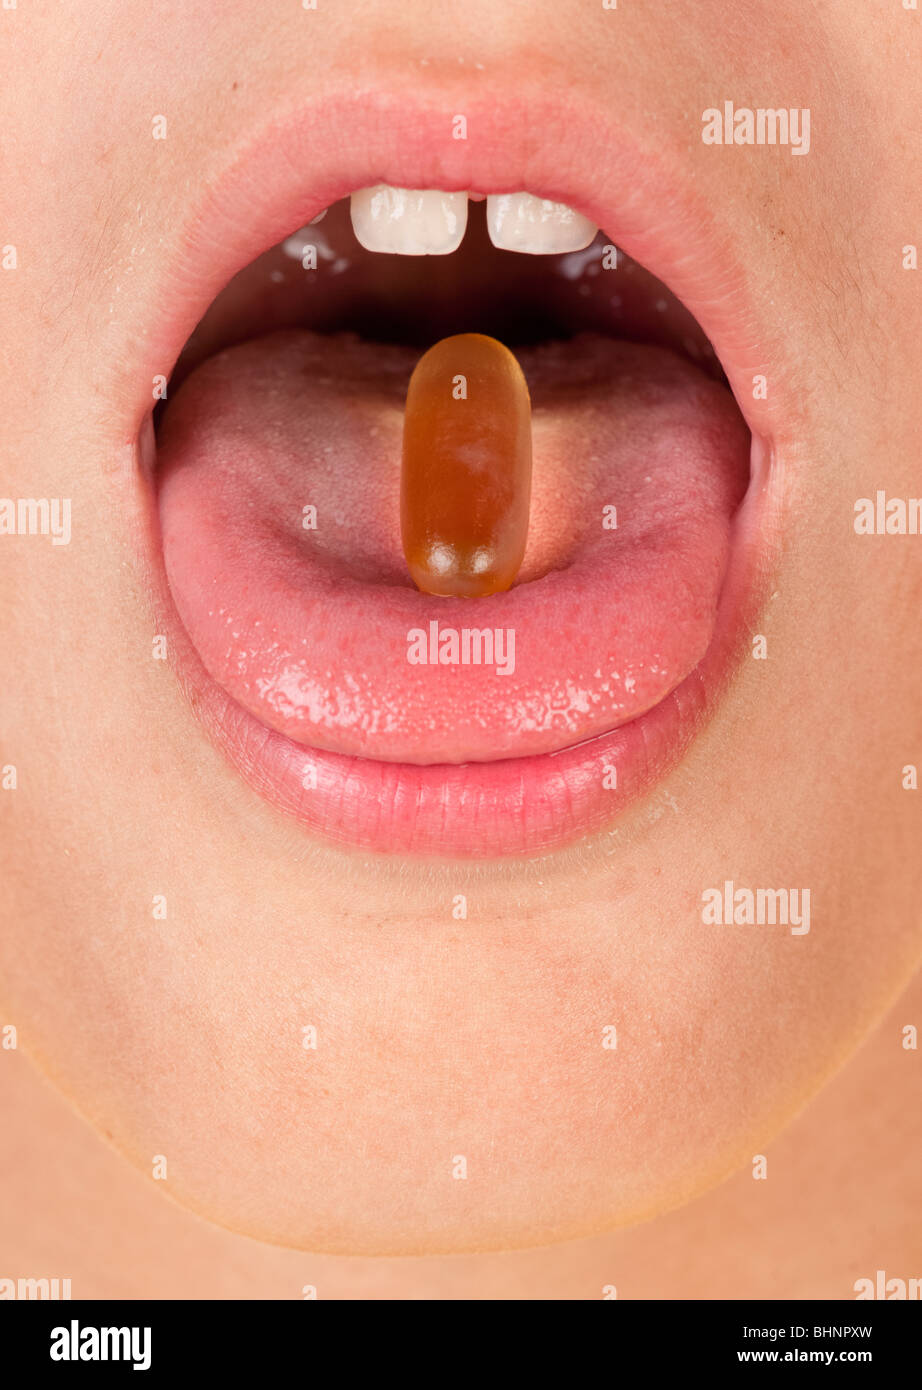 boys mouth with pill or capsule on tongue Stock Photo